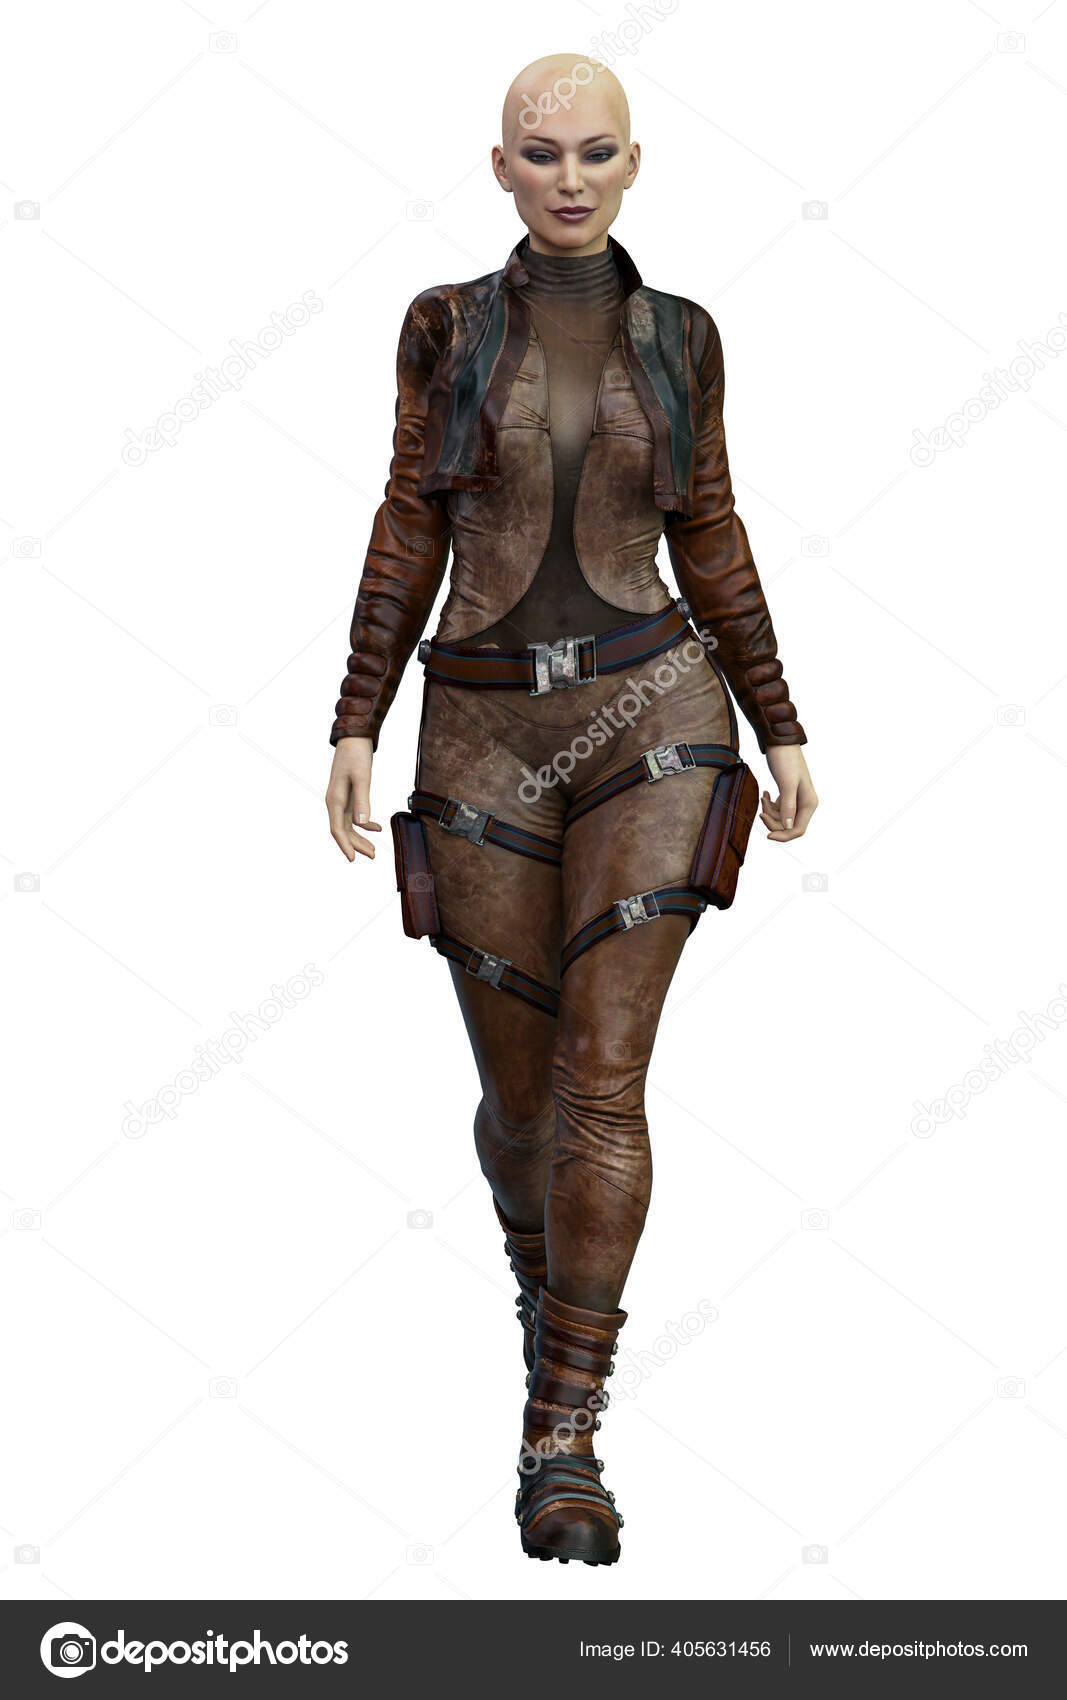 3D rendered female character in futuristic outfit and action pose on  transparent background - 3D Illustration Stock Illustration